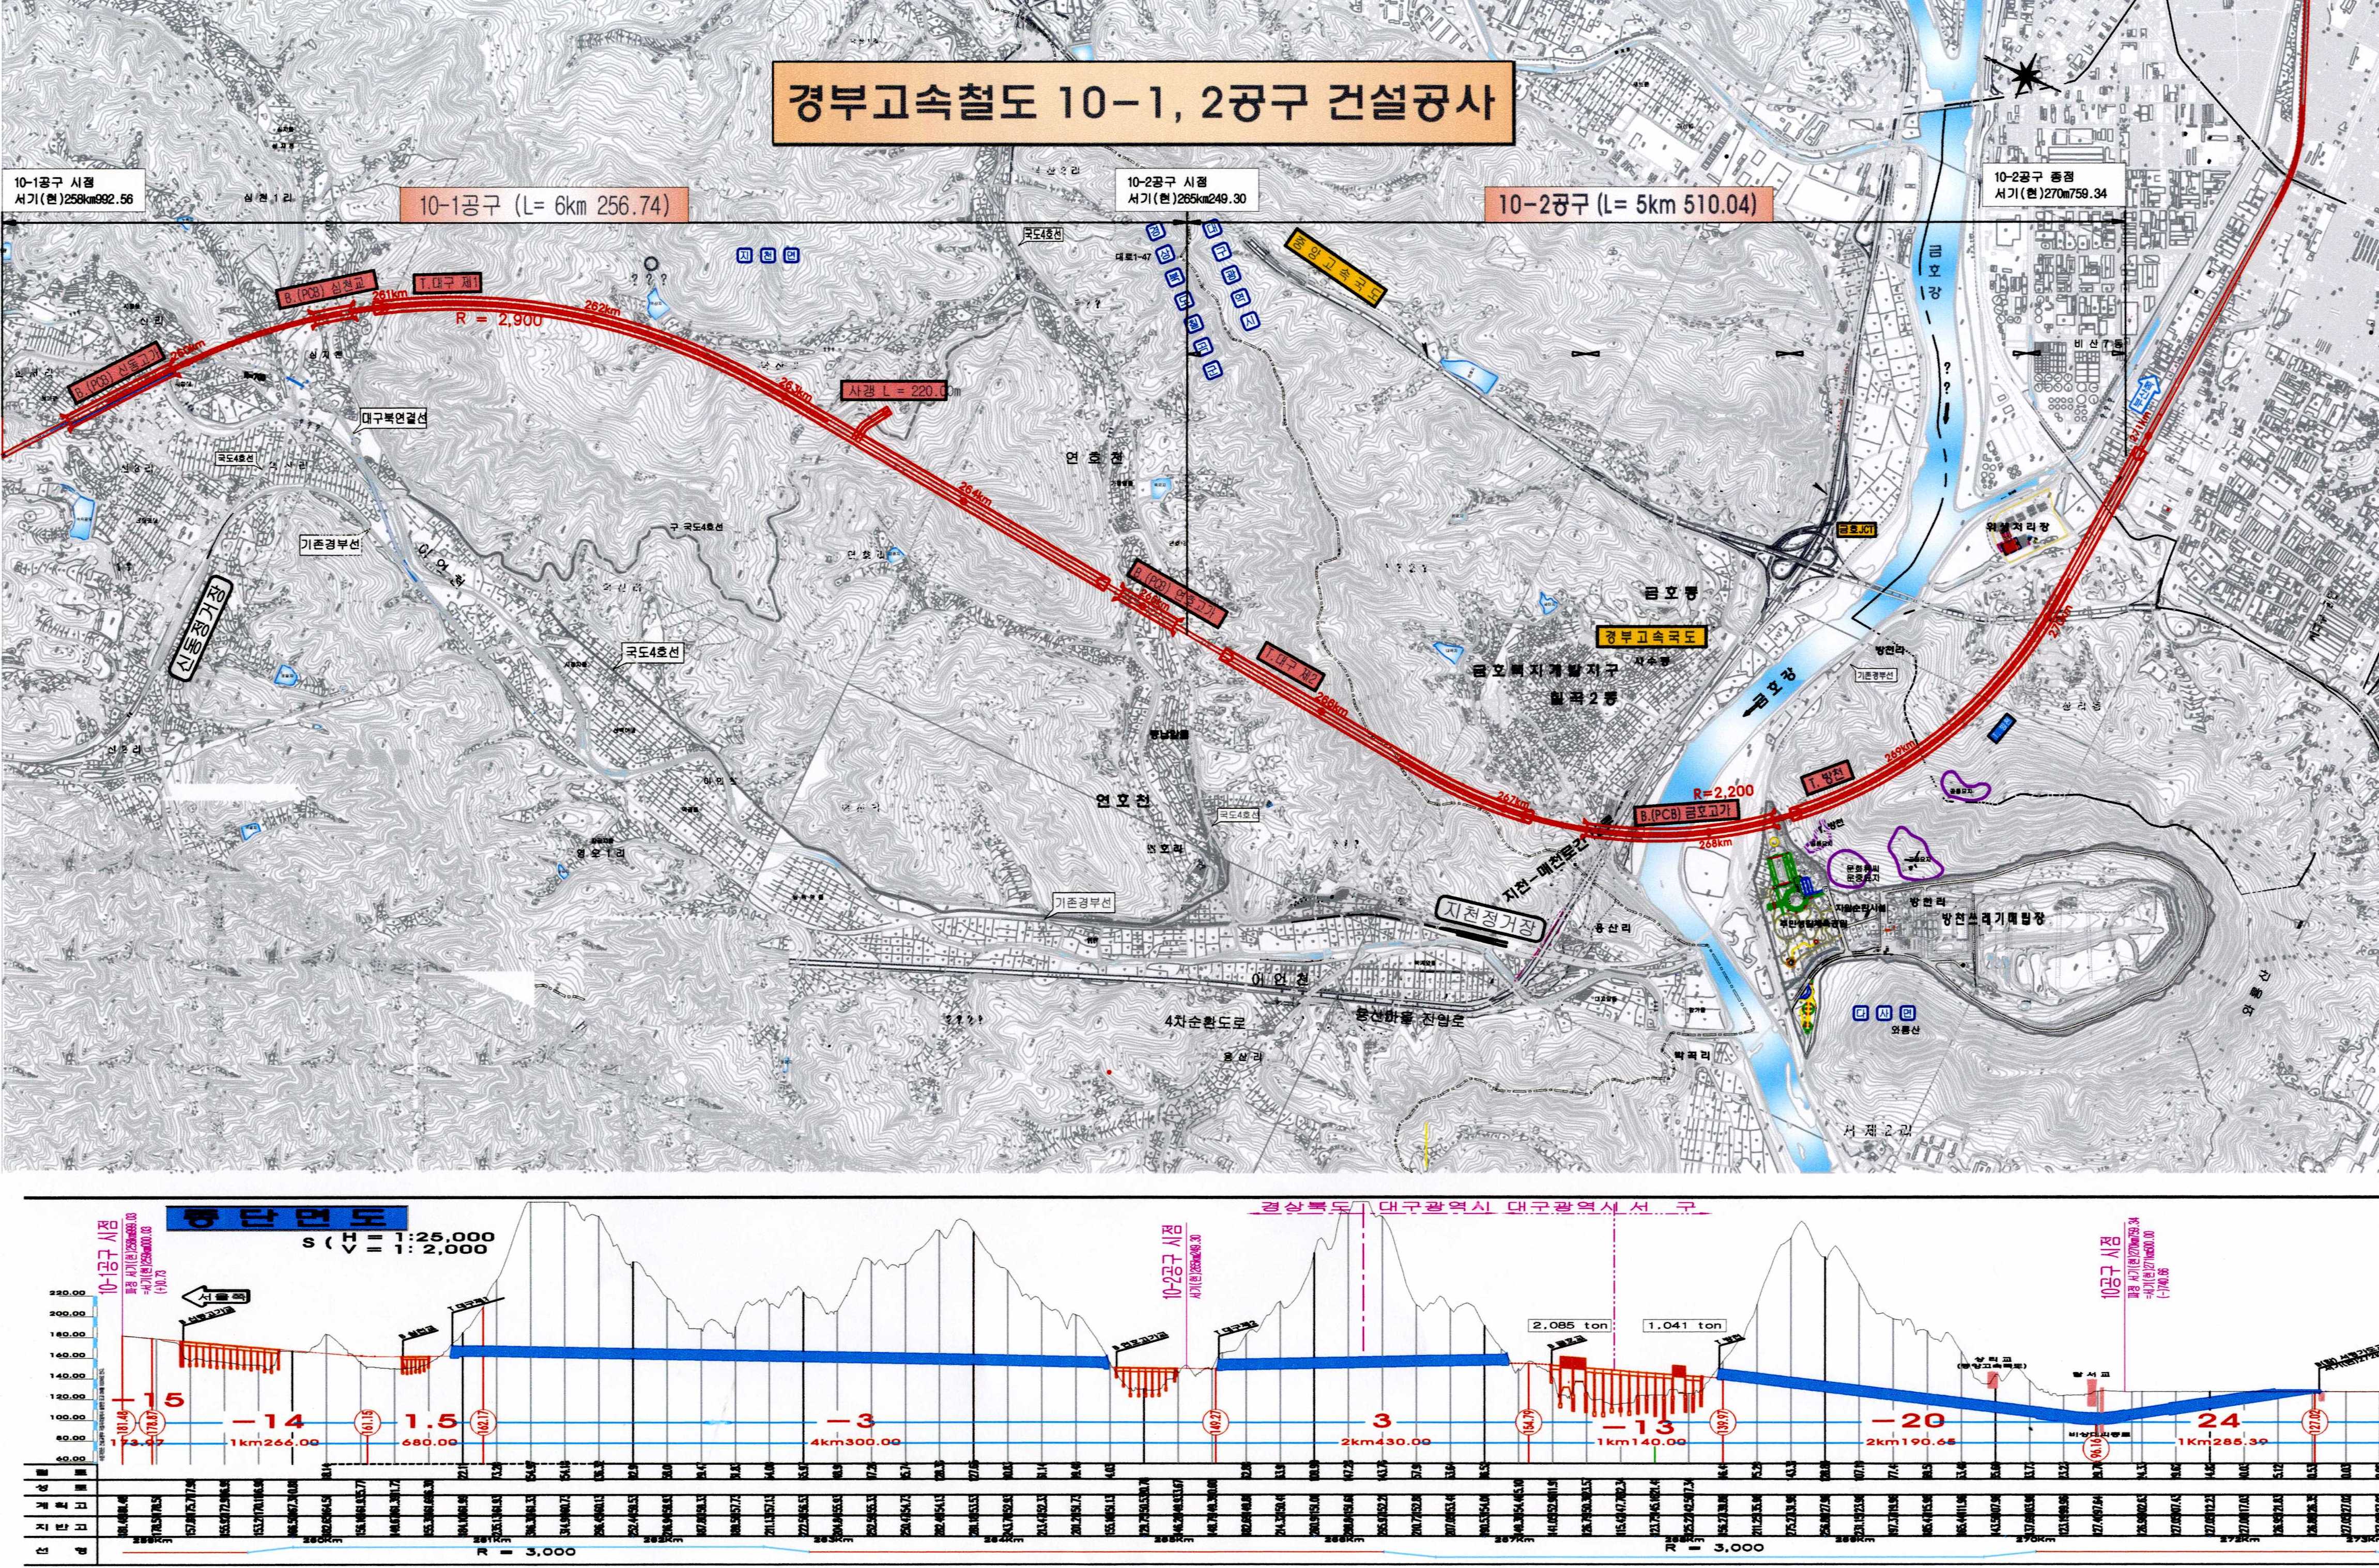 Construction Supervision and Contract Management for Construction of Gyeongbu High Speed Railway (Lot No.10-1 & 2)